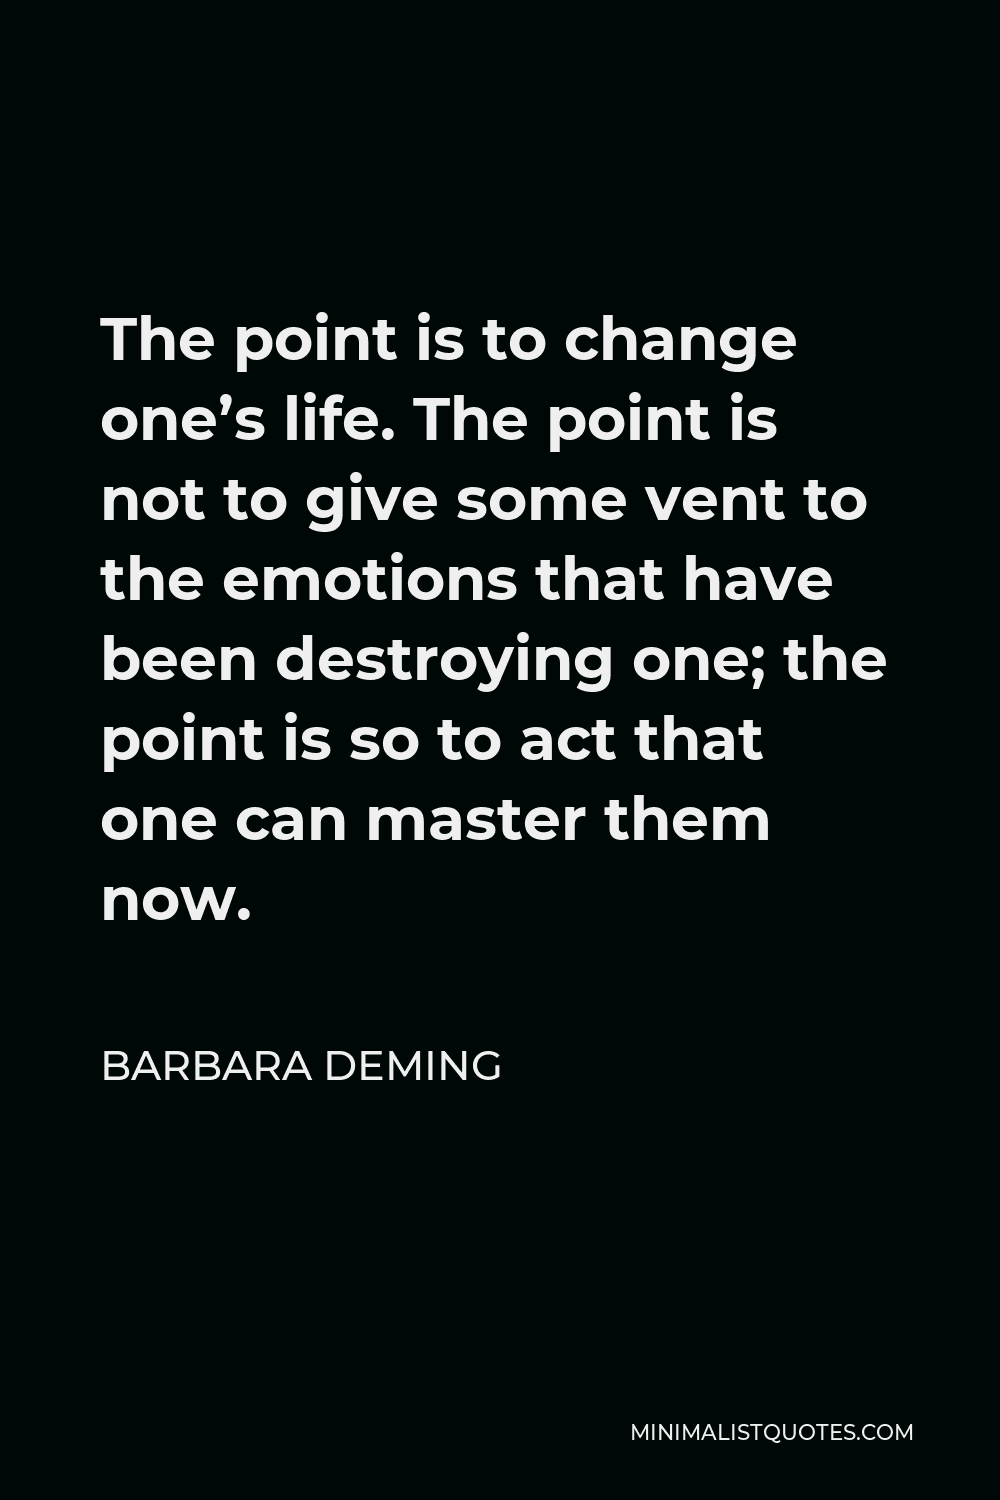 Barbara Deming Quote - The point is to change one’s life. The point is not to give some vent to the emotions that have been destroying one; the point is so to act that one can master them now.